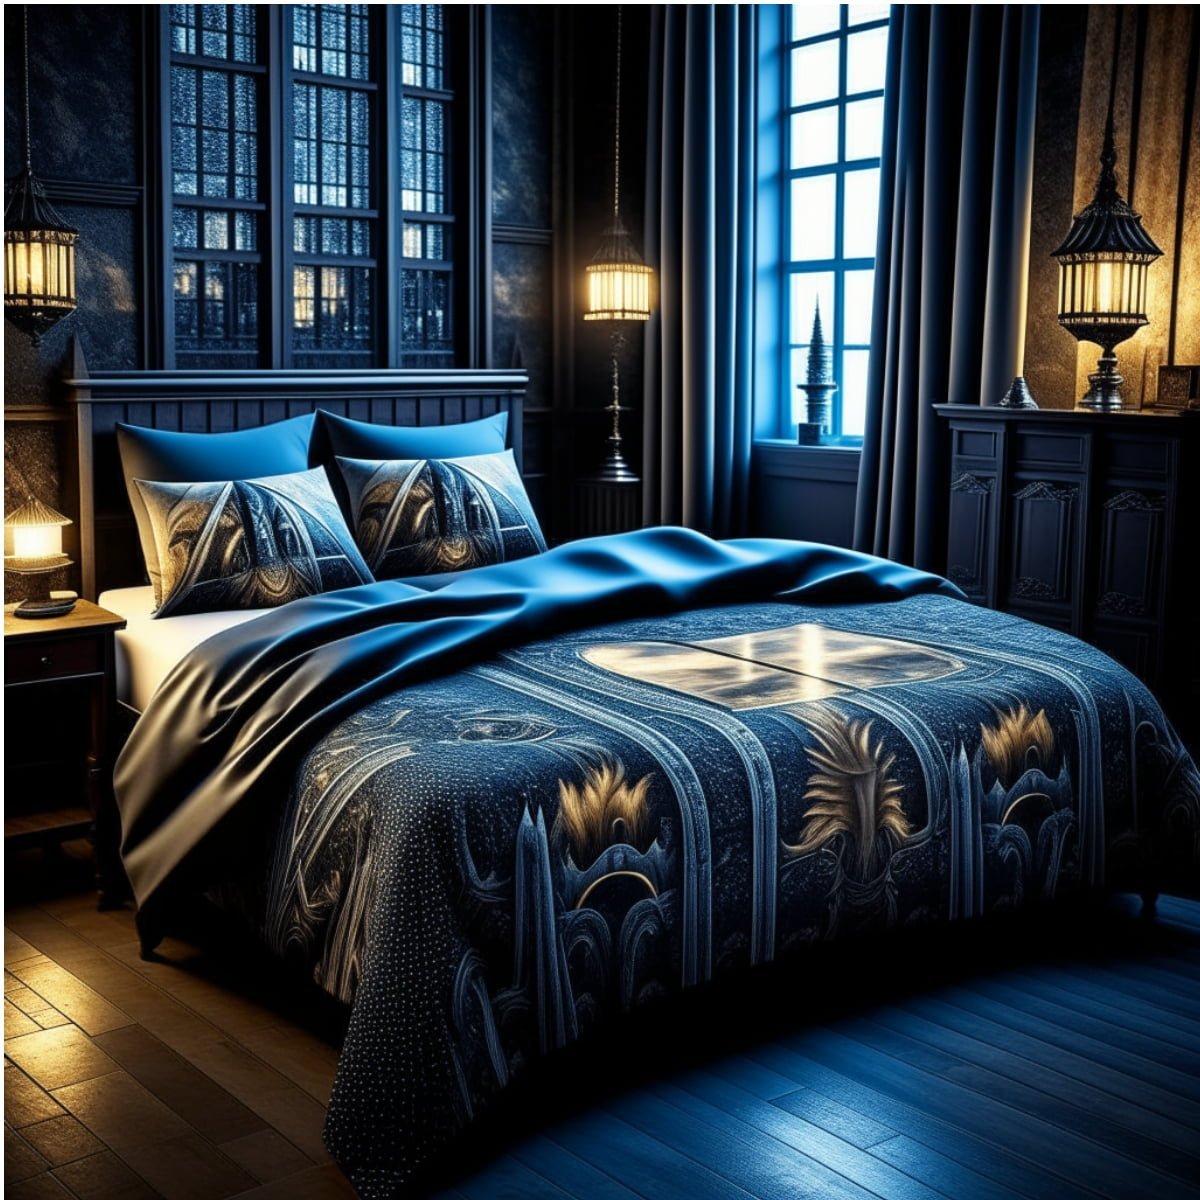 Harry Potter-themed bedding sets. with house colors